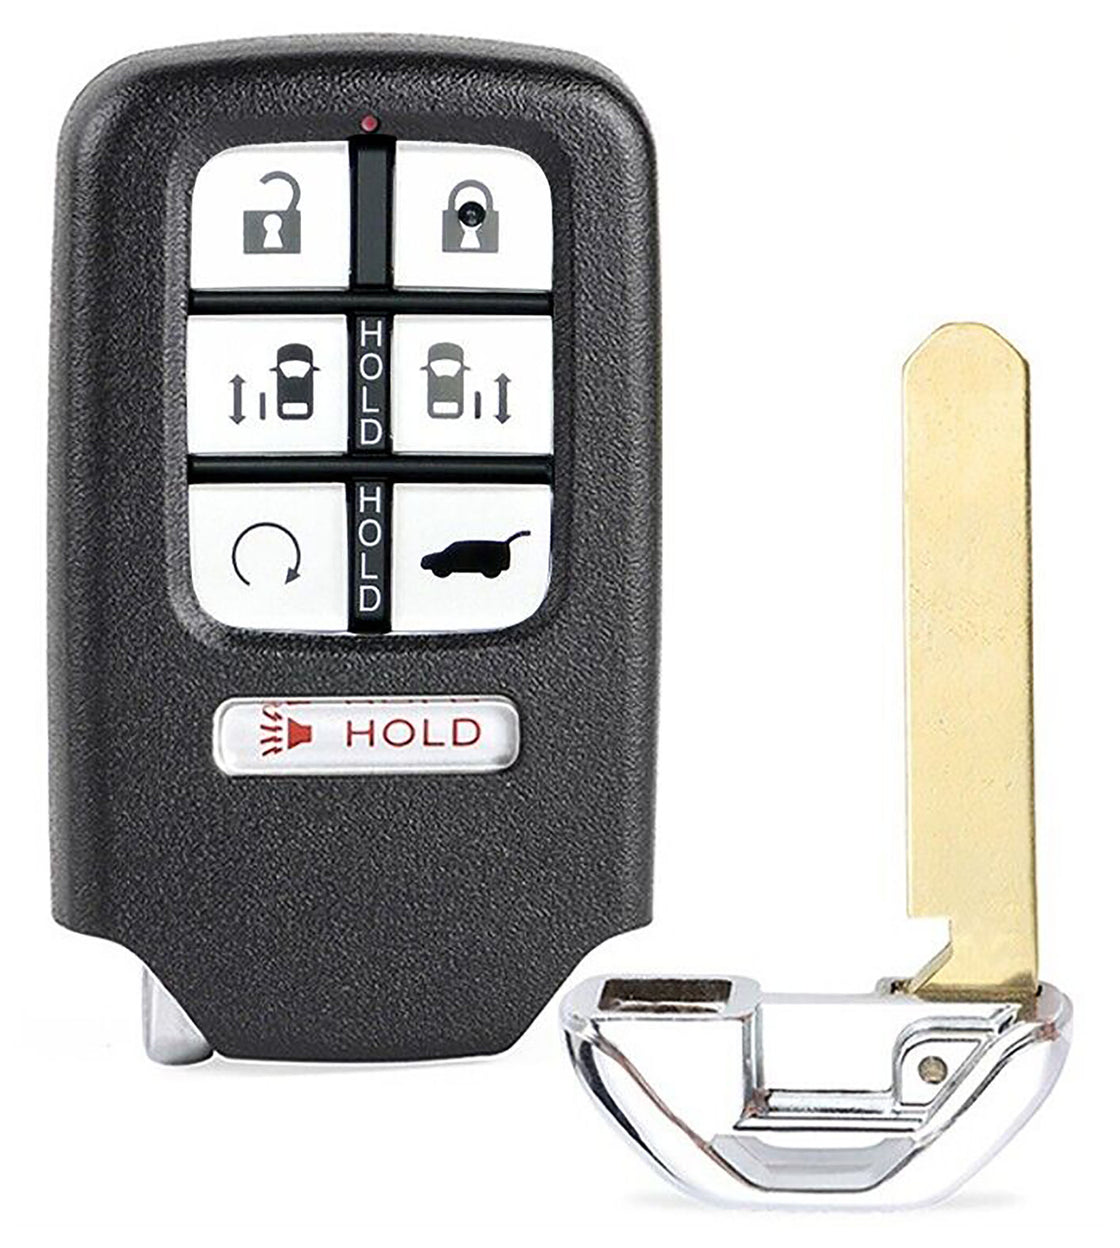 1x New Replacement Proximity Remote Key Fob Compatible with & Fit For Honda Vehicles KR5V2X V41 - MPN KR5V2X-02